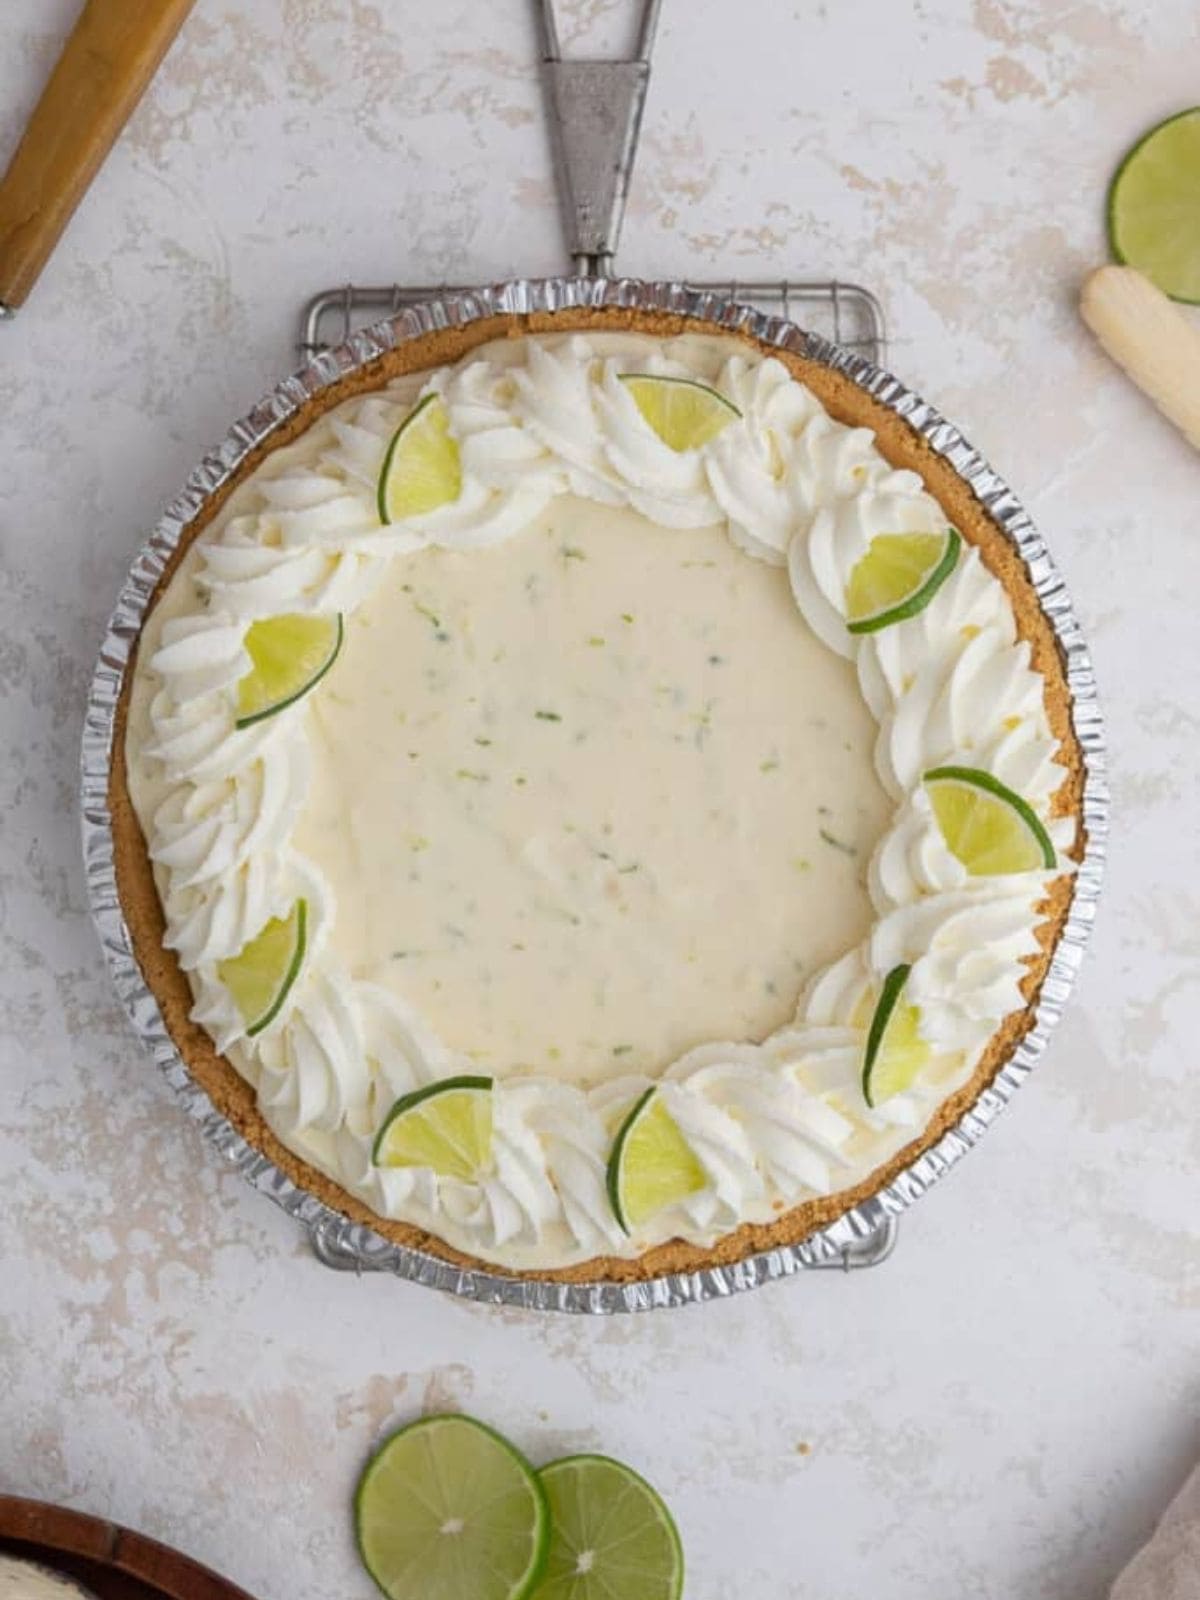 Key Lime Pie topped with cream frosting and lime slices.